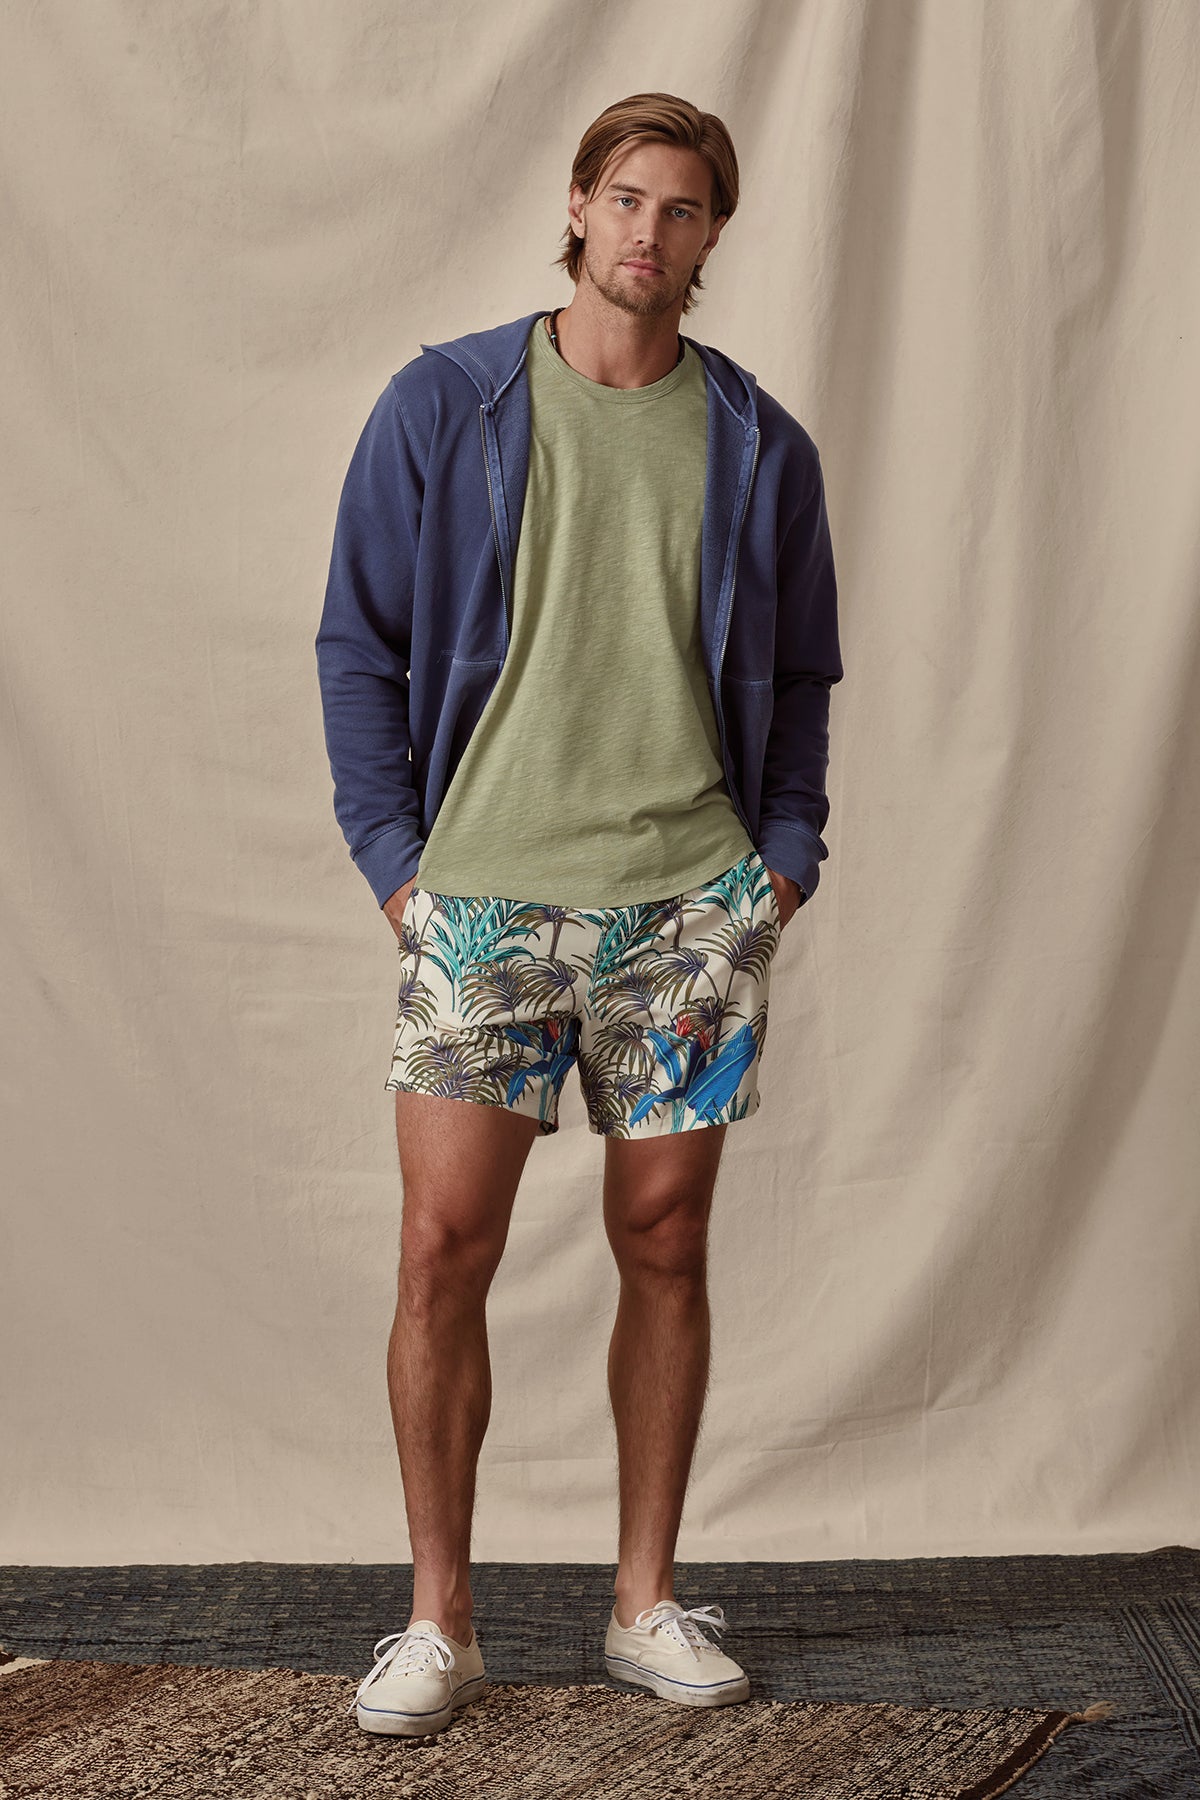 Man standing in a casual pose wearing a navy zip-up hoodie, green crew neck Velvet by Graham & Spencer t-shirt, tropical print shorts, and white sneakers, against a beige backdrop.-36752671473857